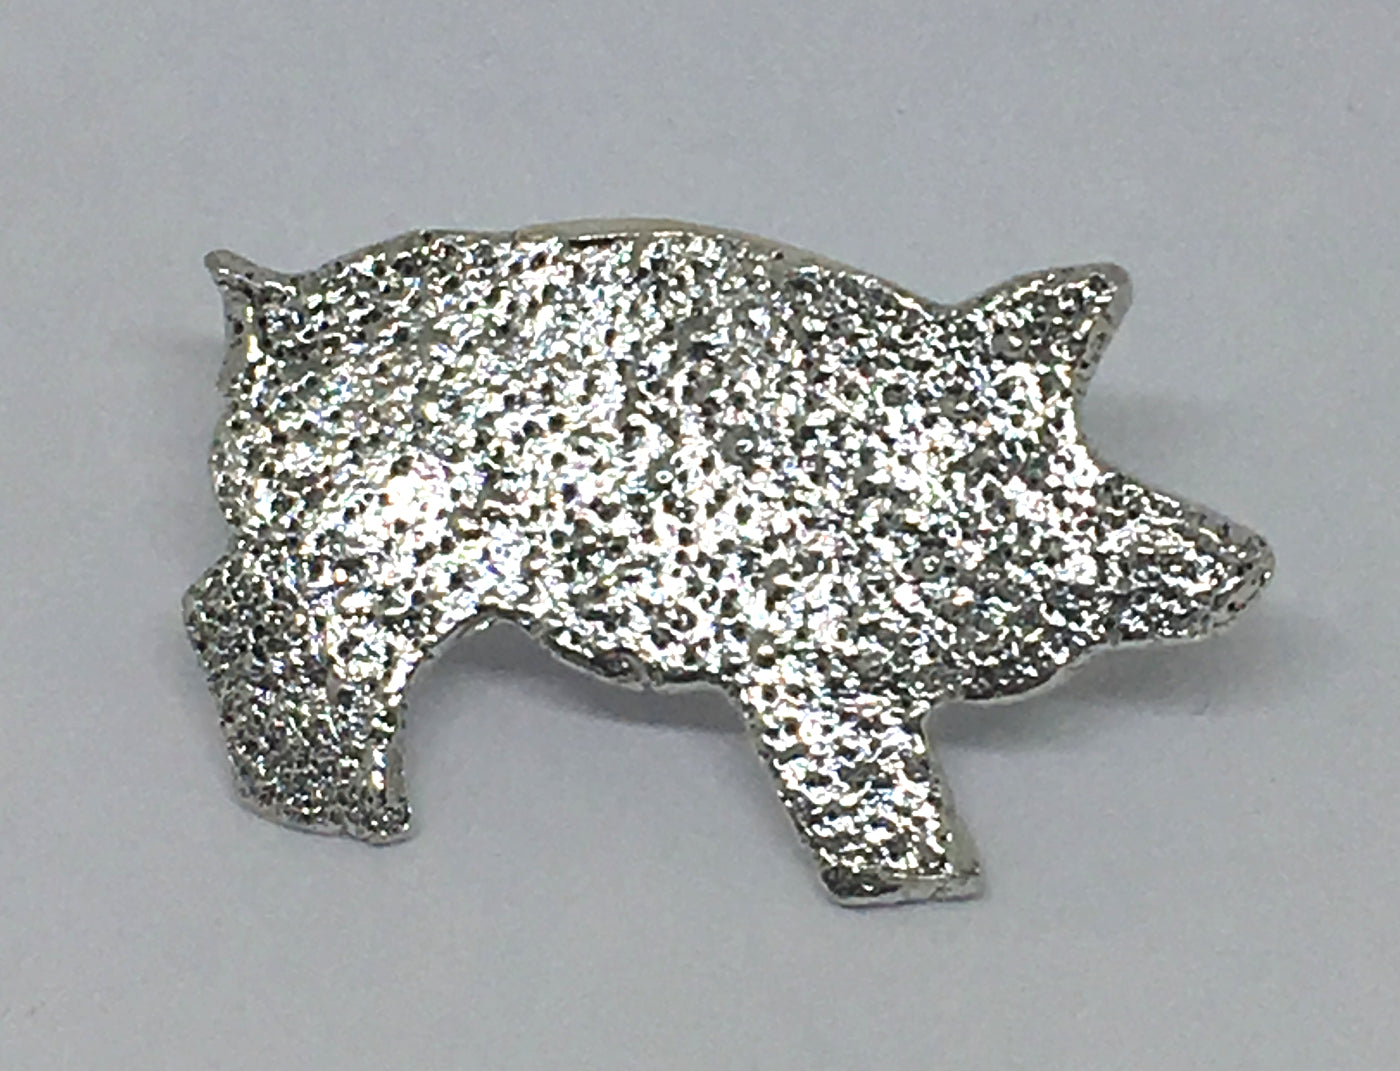 the chefjewelry pig pin is fabulous